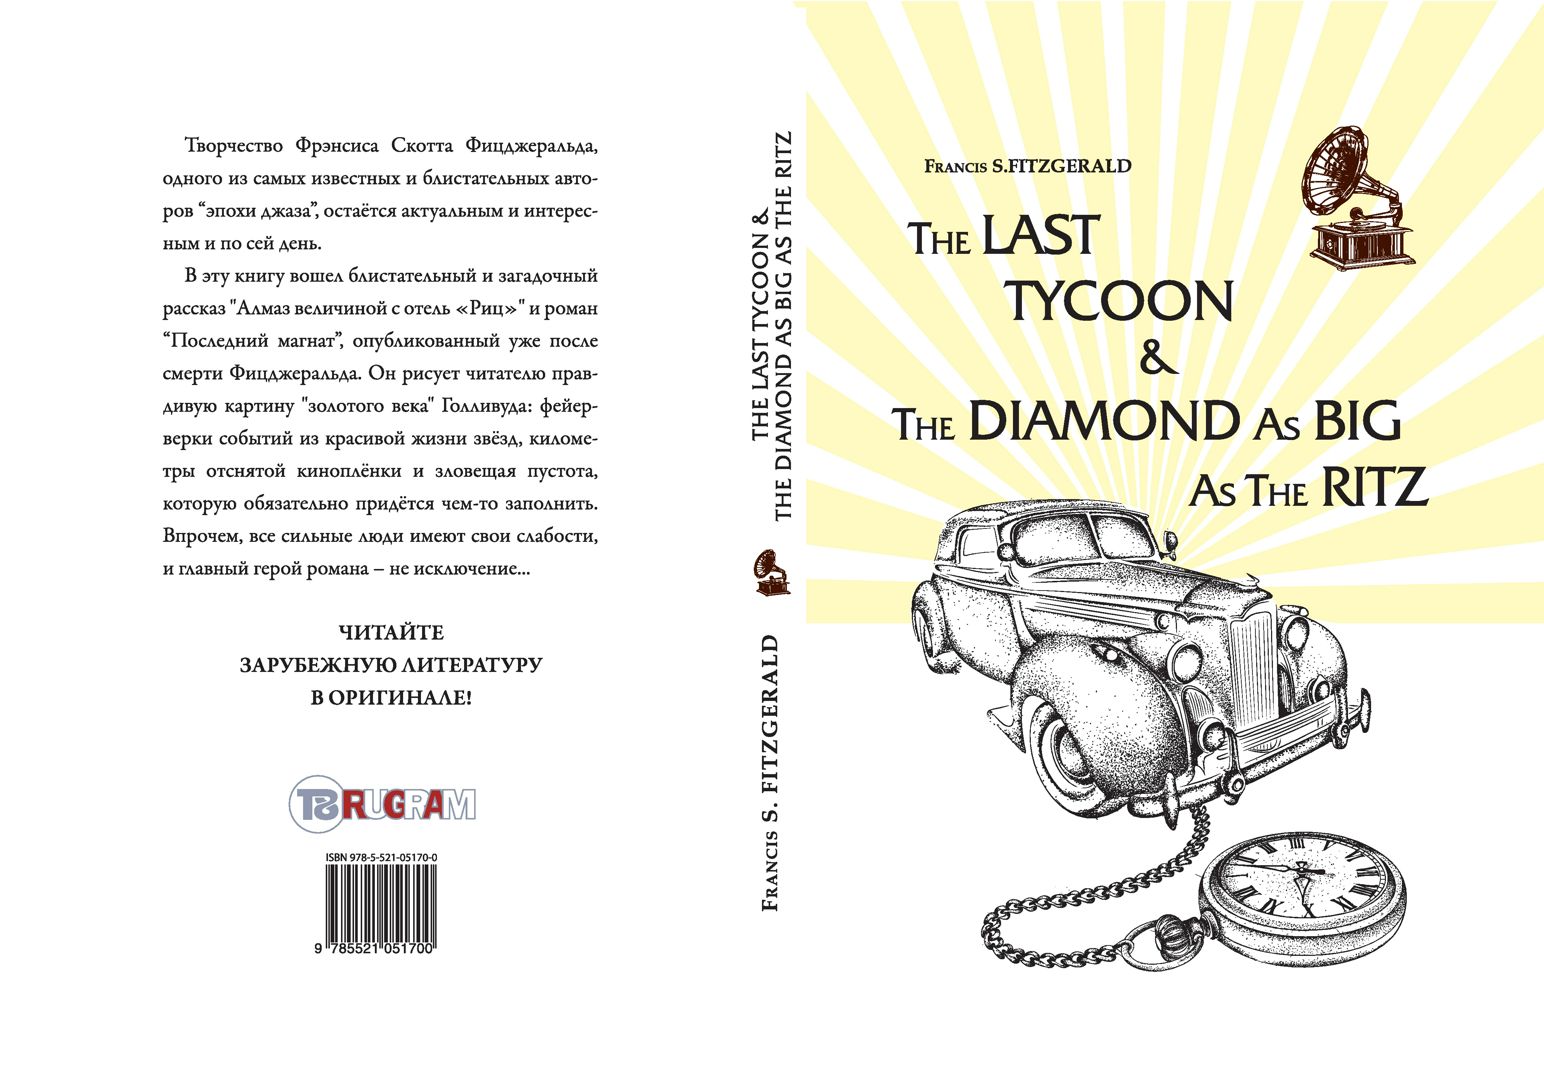 The Last Tycoon & The Diamond As Big As The Ritz